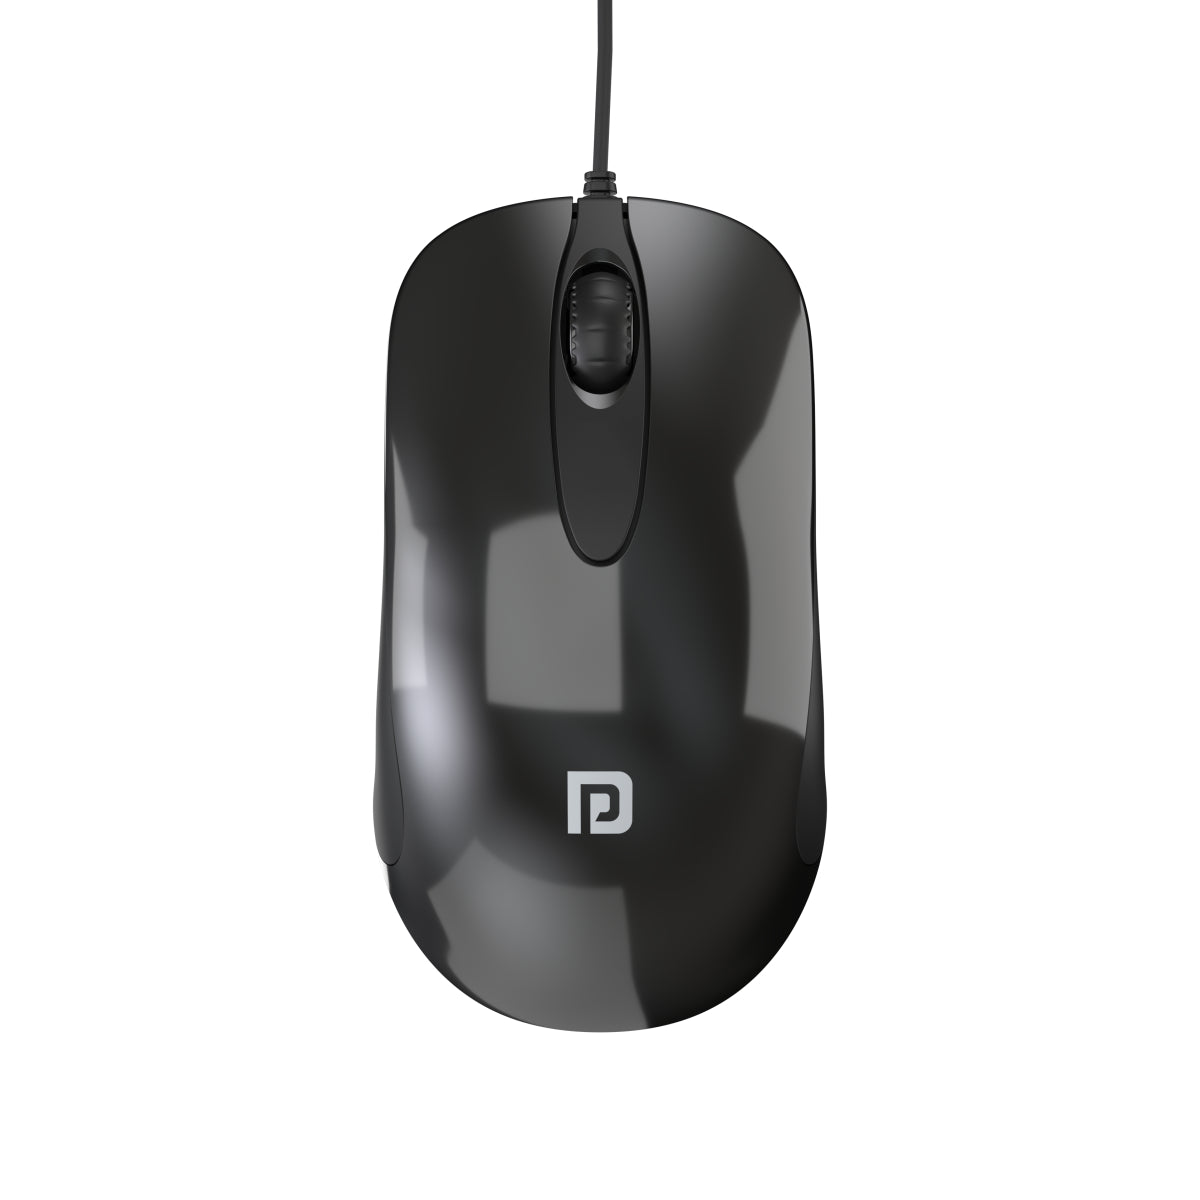 PORTRONICS-Toad 26 Wired Optical Mouse